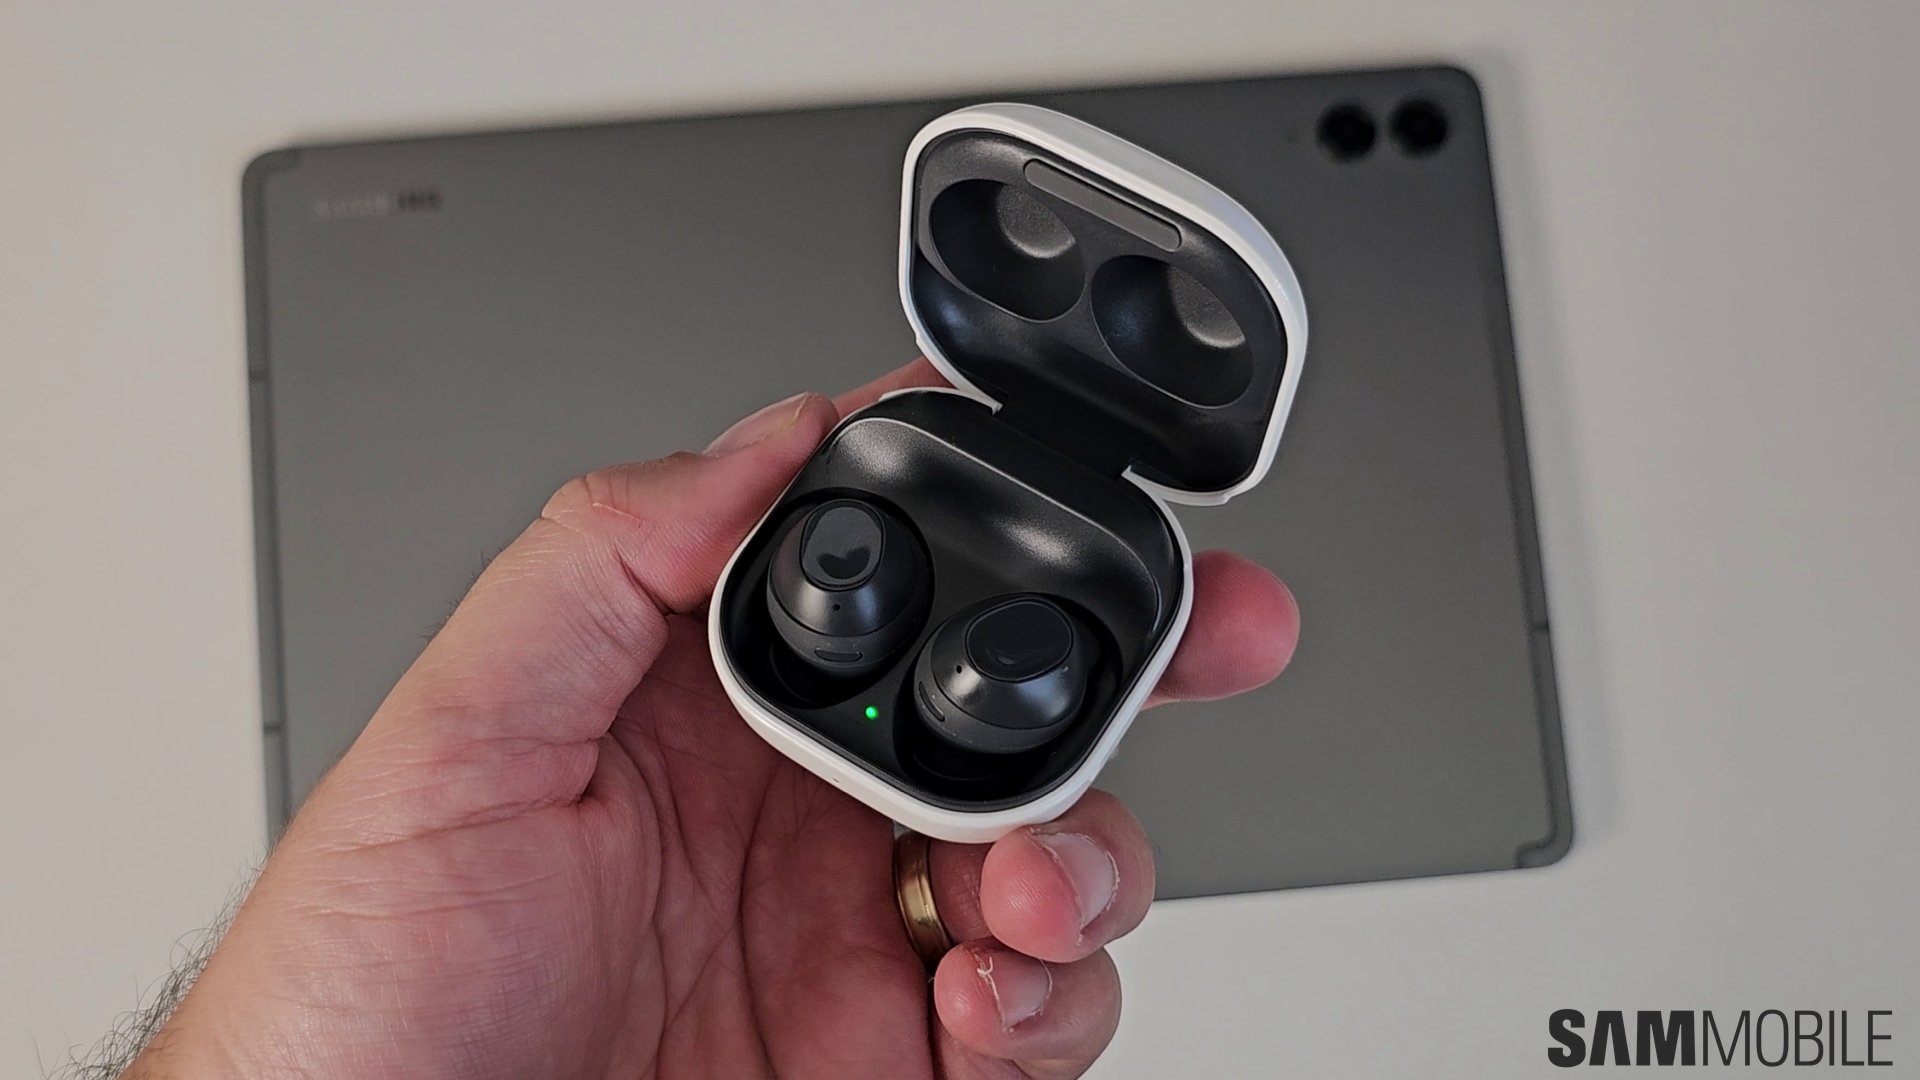 Samsung Galaxy Buds FE price, release date, and availability - SamMobile